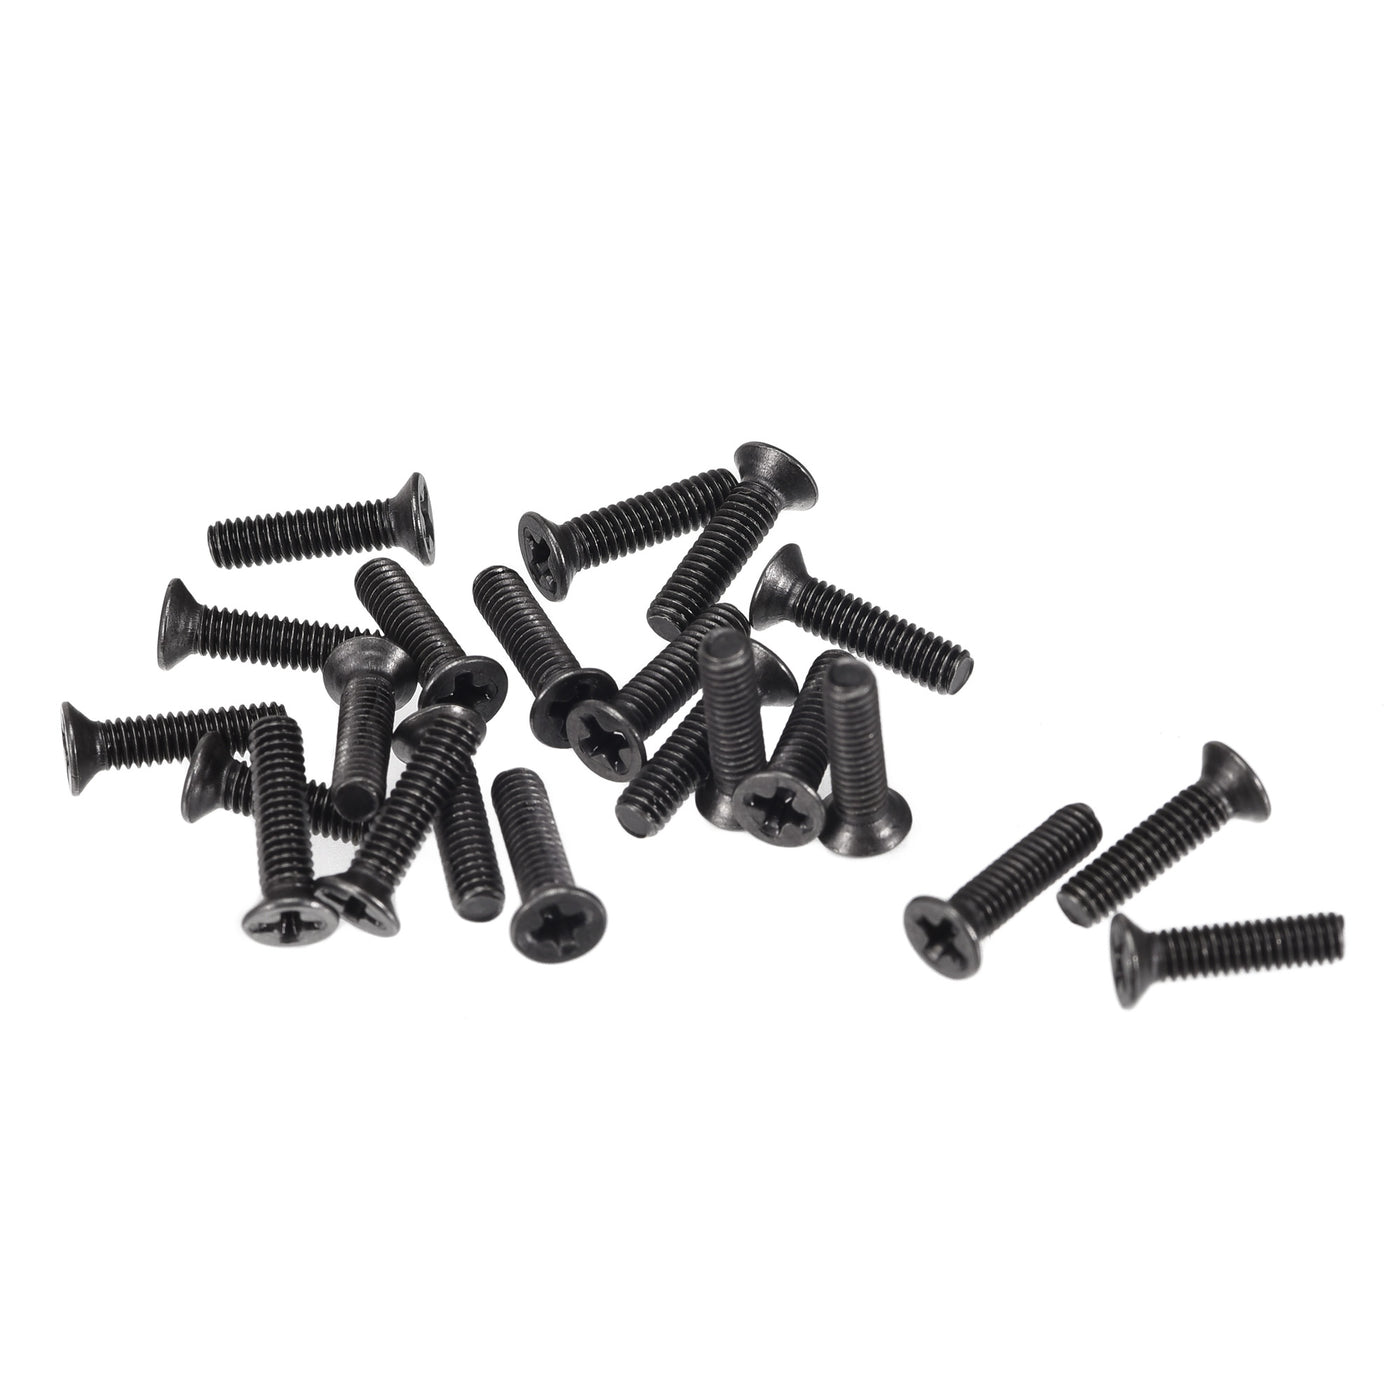 uxcell Uxcell M2.5 x 10mm Phillips Flat Head Screws Carbon Steel Machine Screws Black for Home Office Computer Case Appliance Equipment 350pcs